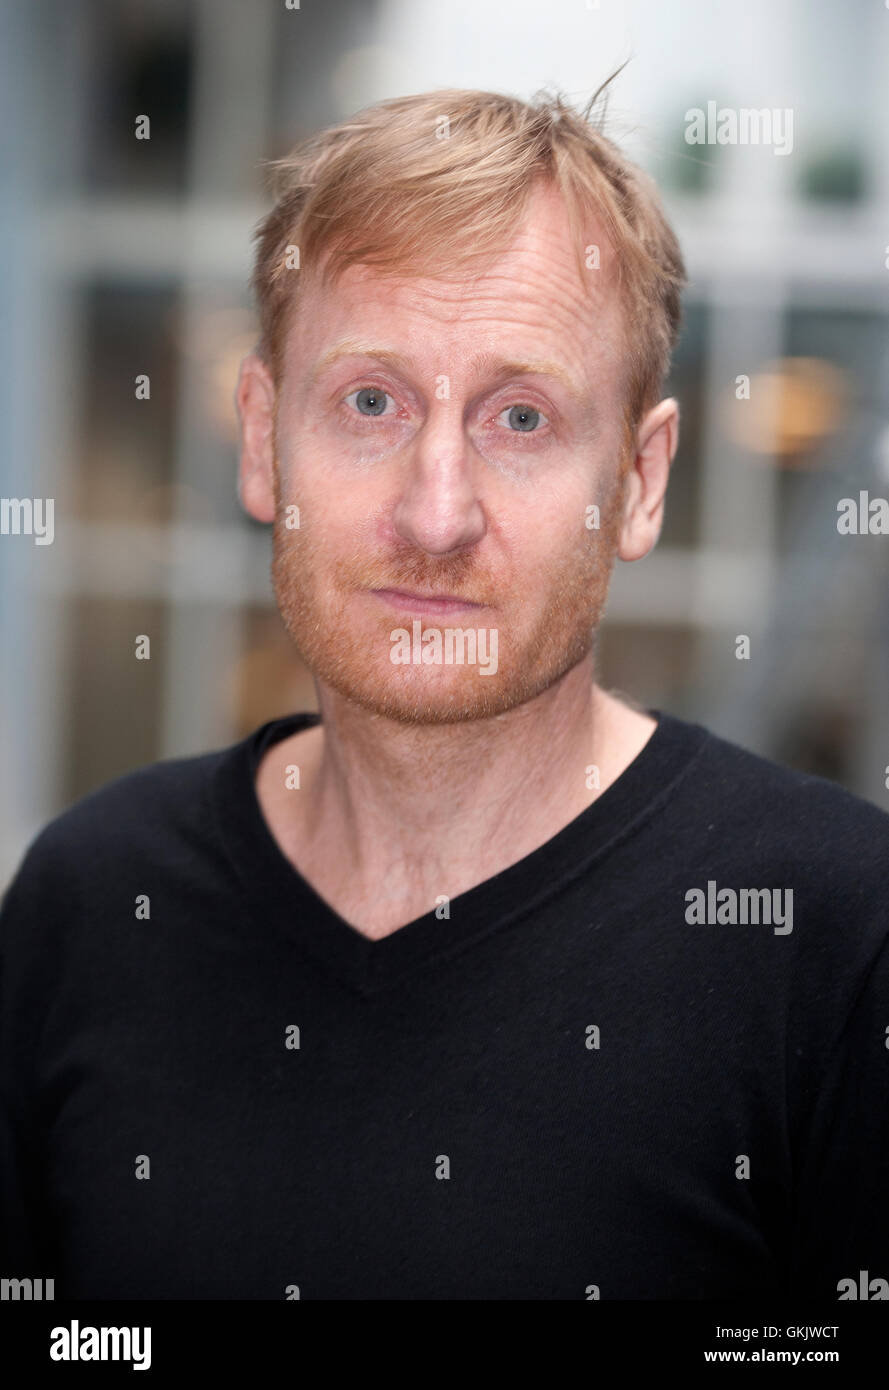 GUSTAF HAMMARSTEN actor known from television and film Stock Photo